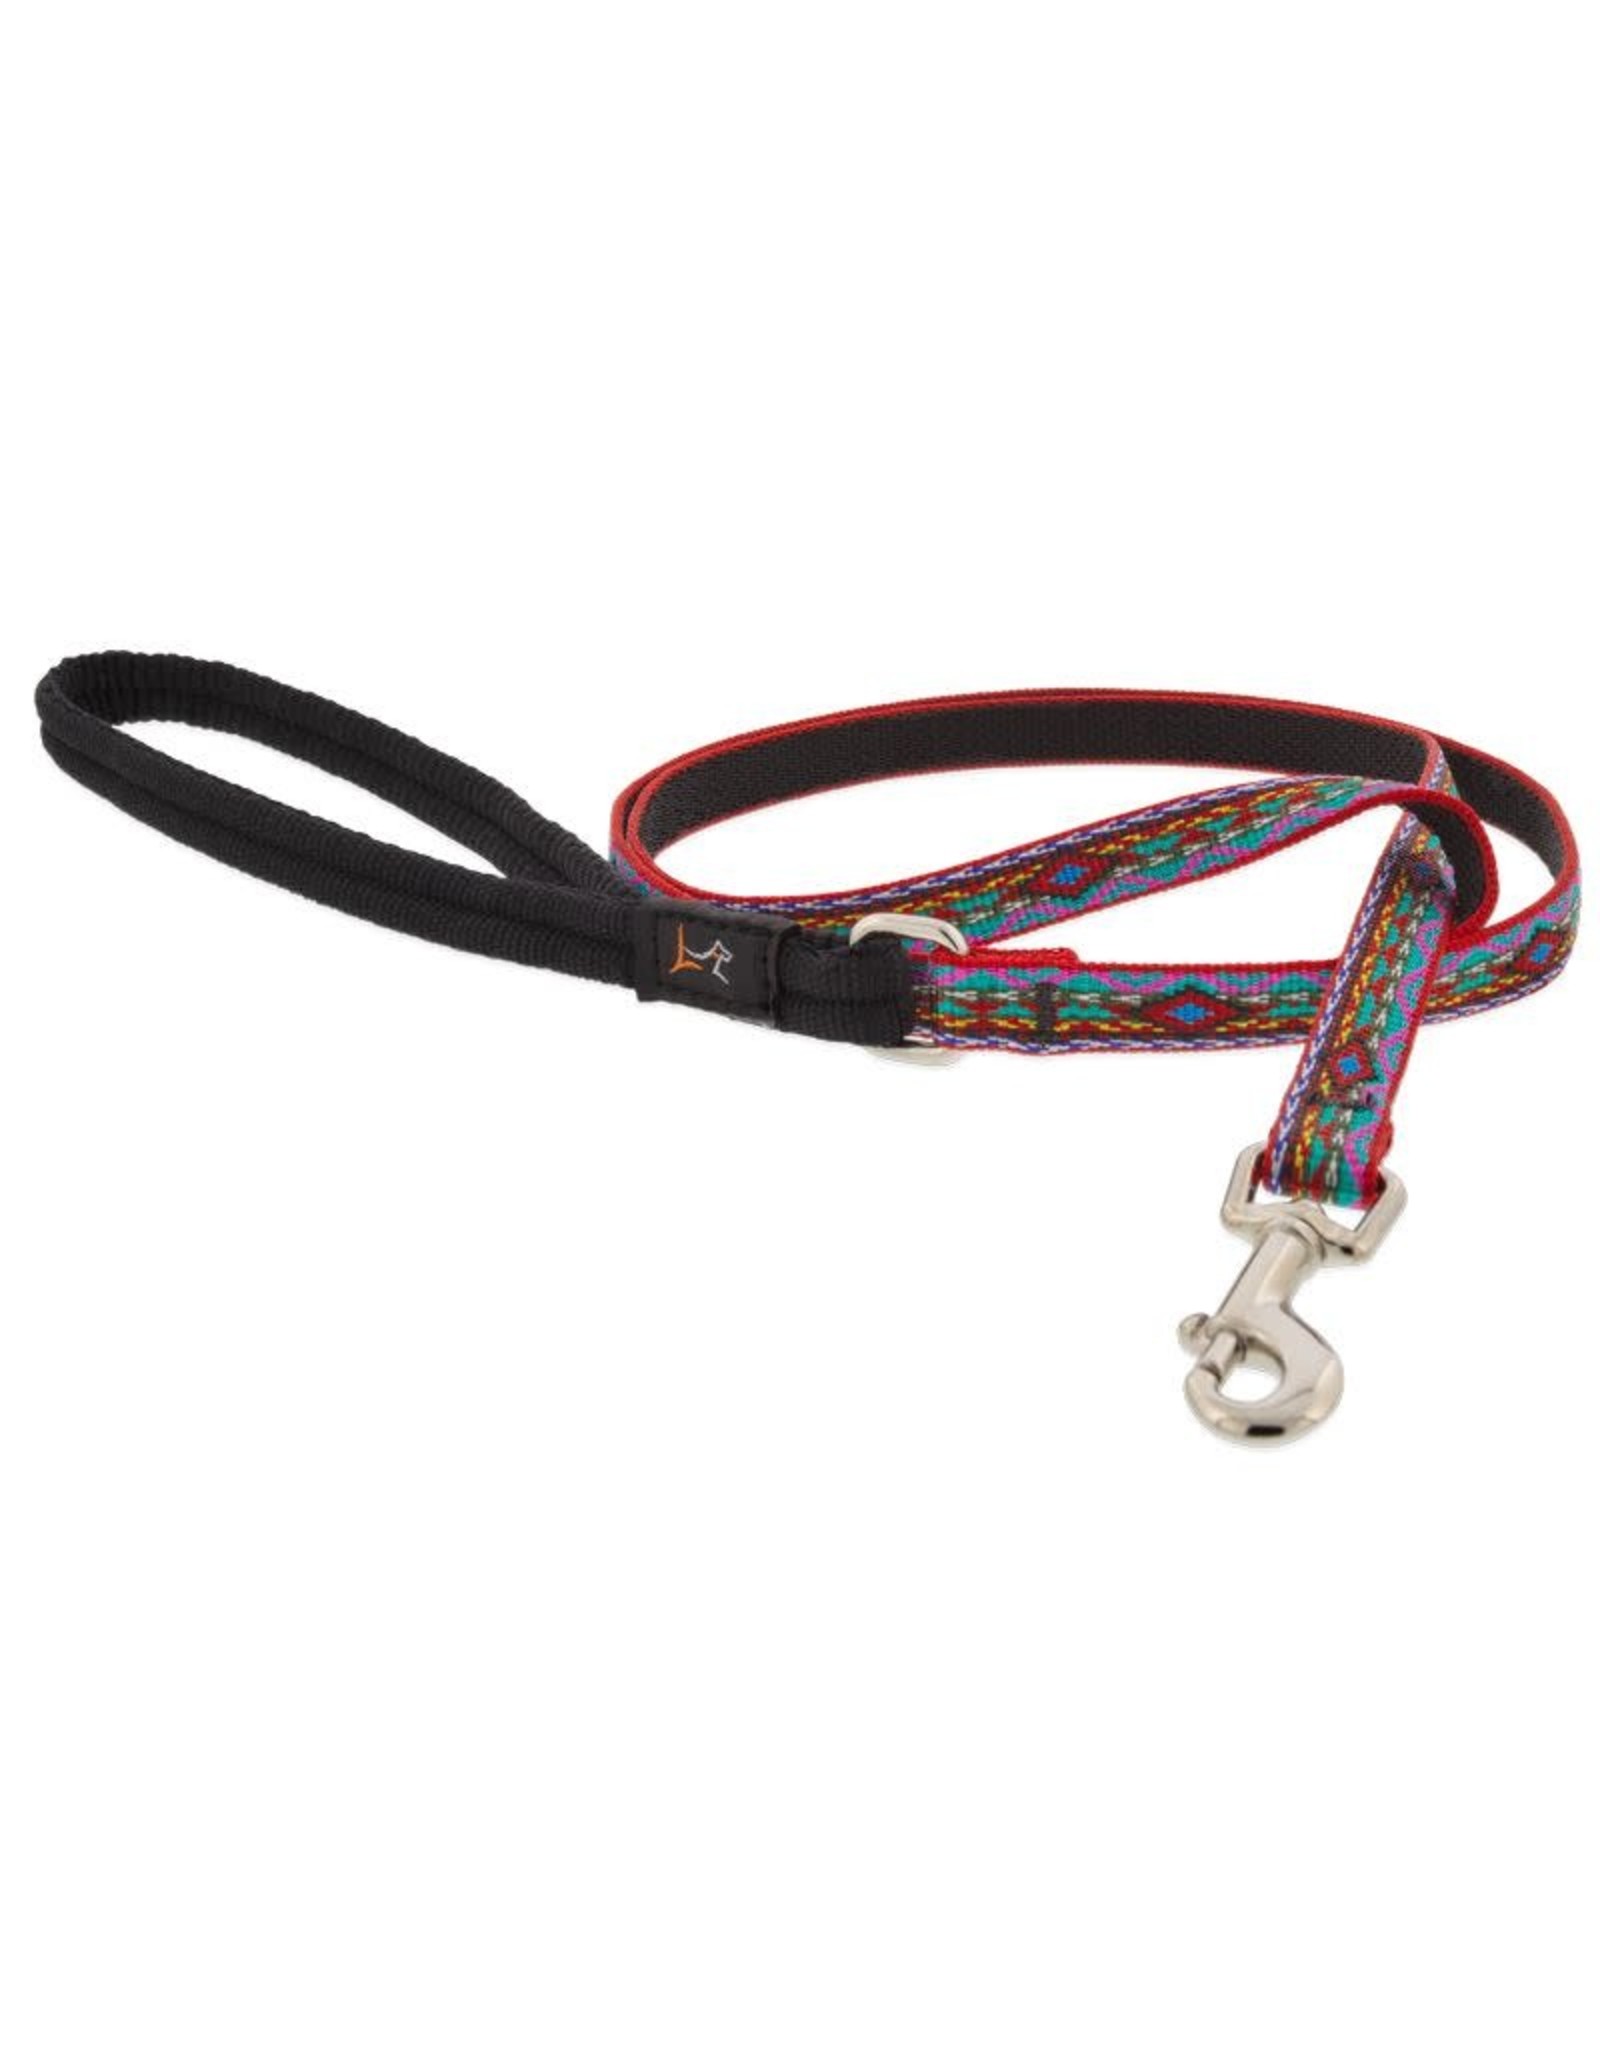 Lupine Lupine El Paso Leash: 1/2 in wide, 6 ft